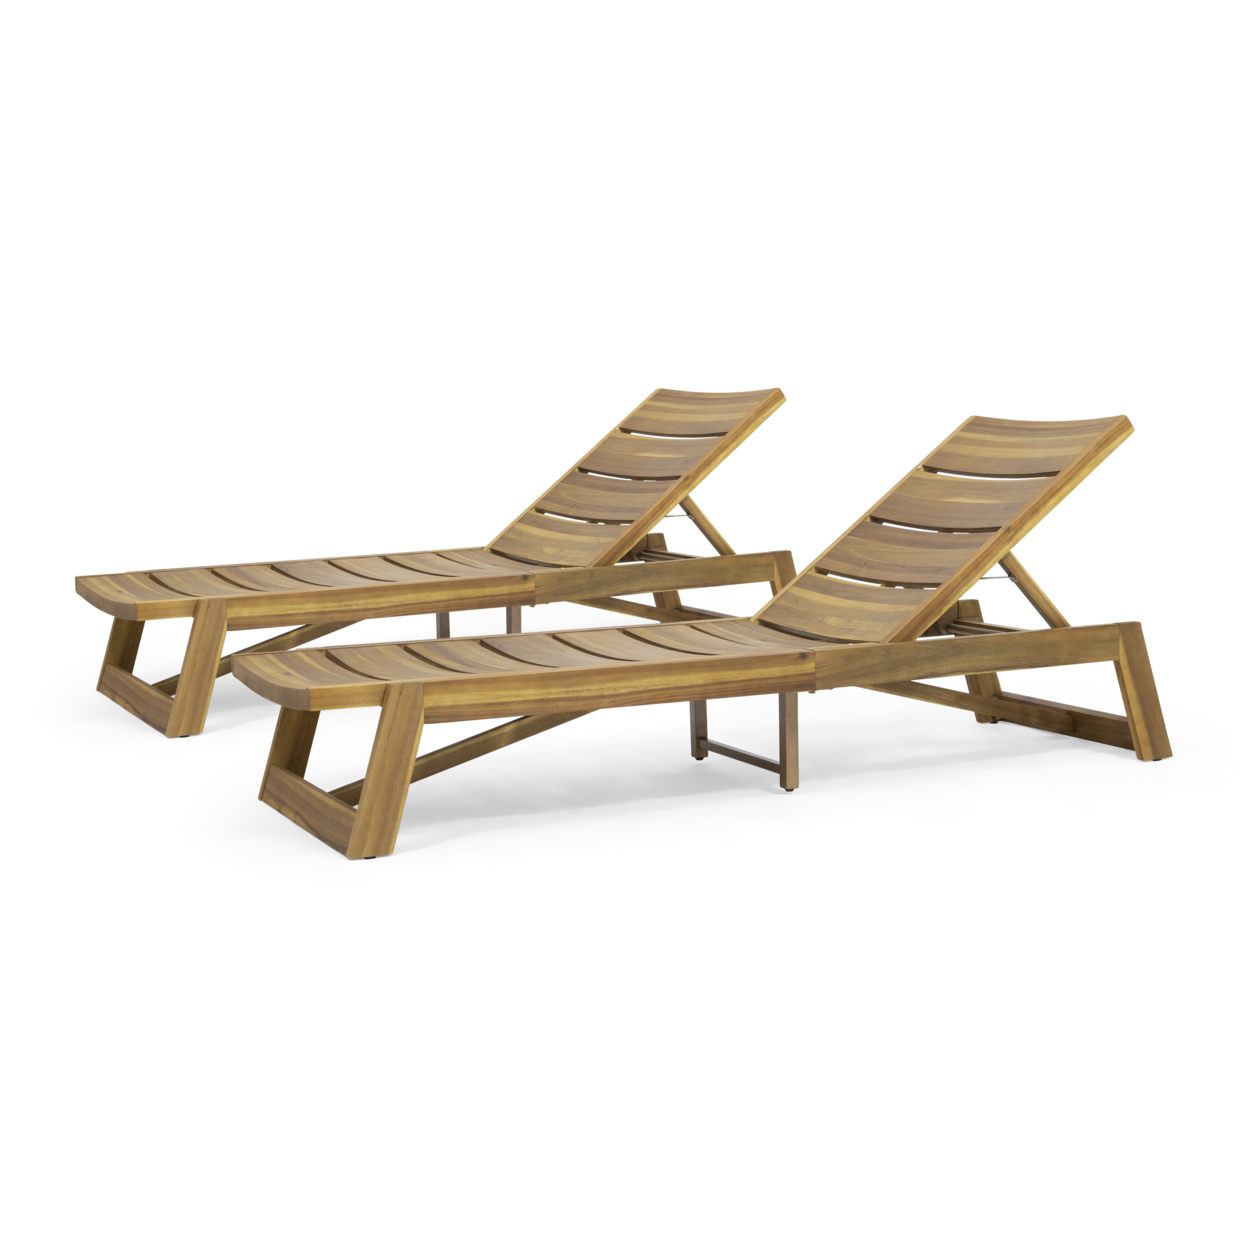 Angela Outdoor Wood And Iron Chaise Lounges (Set Of 2) - Teak Finish, Yellow